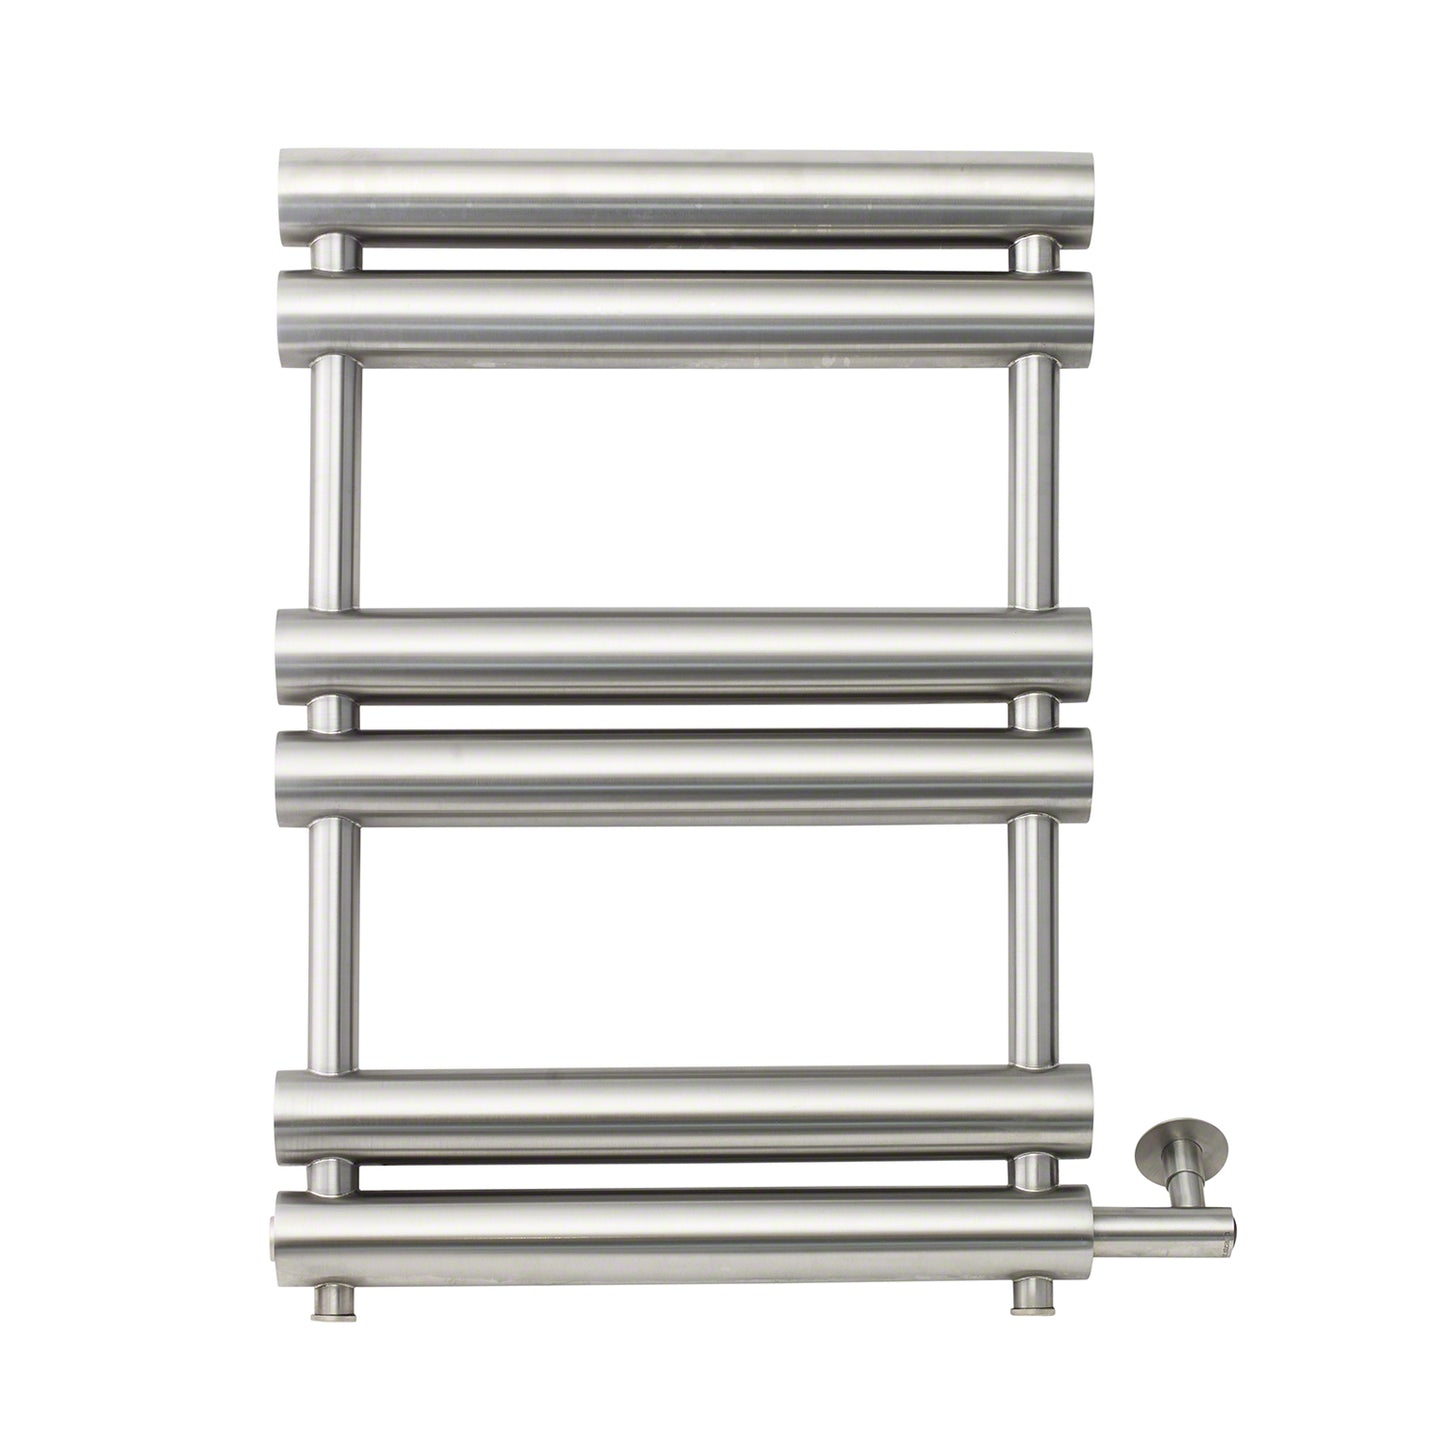 WX27 6-Bar Wall Mounted Electric Towel Warmer with Digital Timer in Stainless Steel Polished